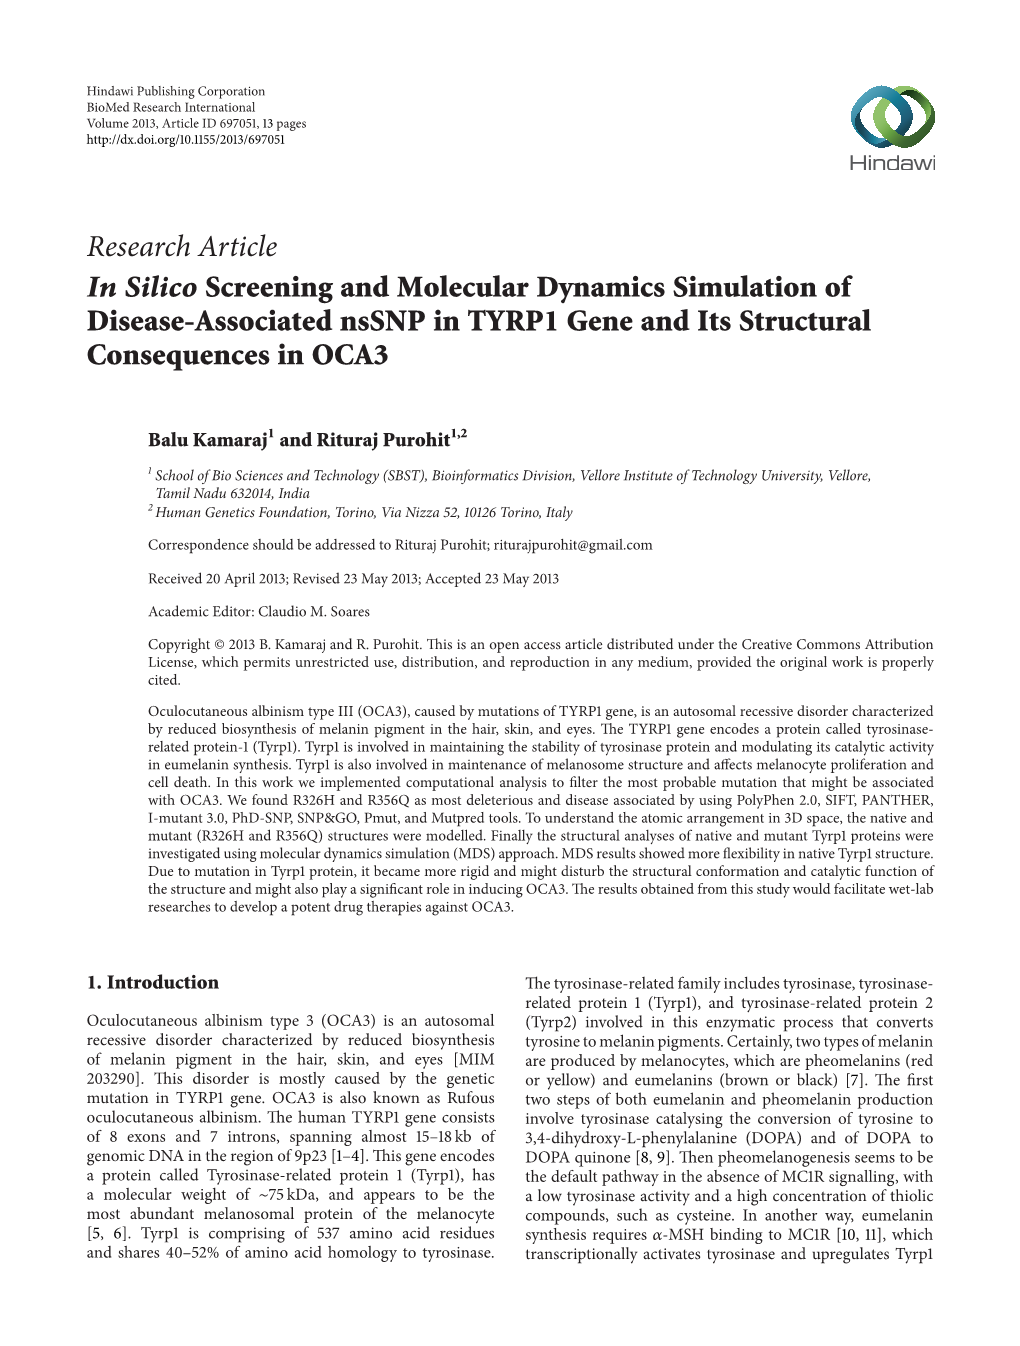 Research Article in Silico Screening and Molecular Dynamics Simulation of Disease-Associated Nssnp in TYRP1 Gene and Its Structural Consequences in OCA3